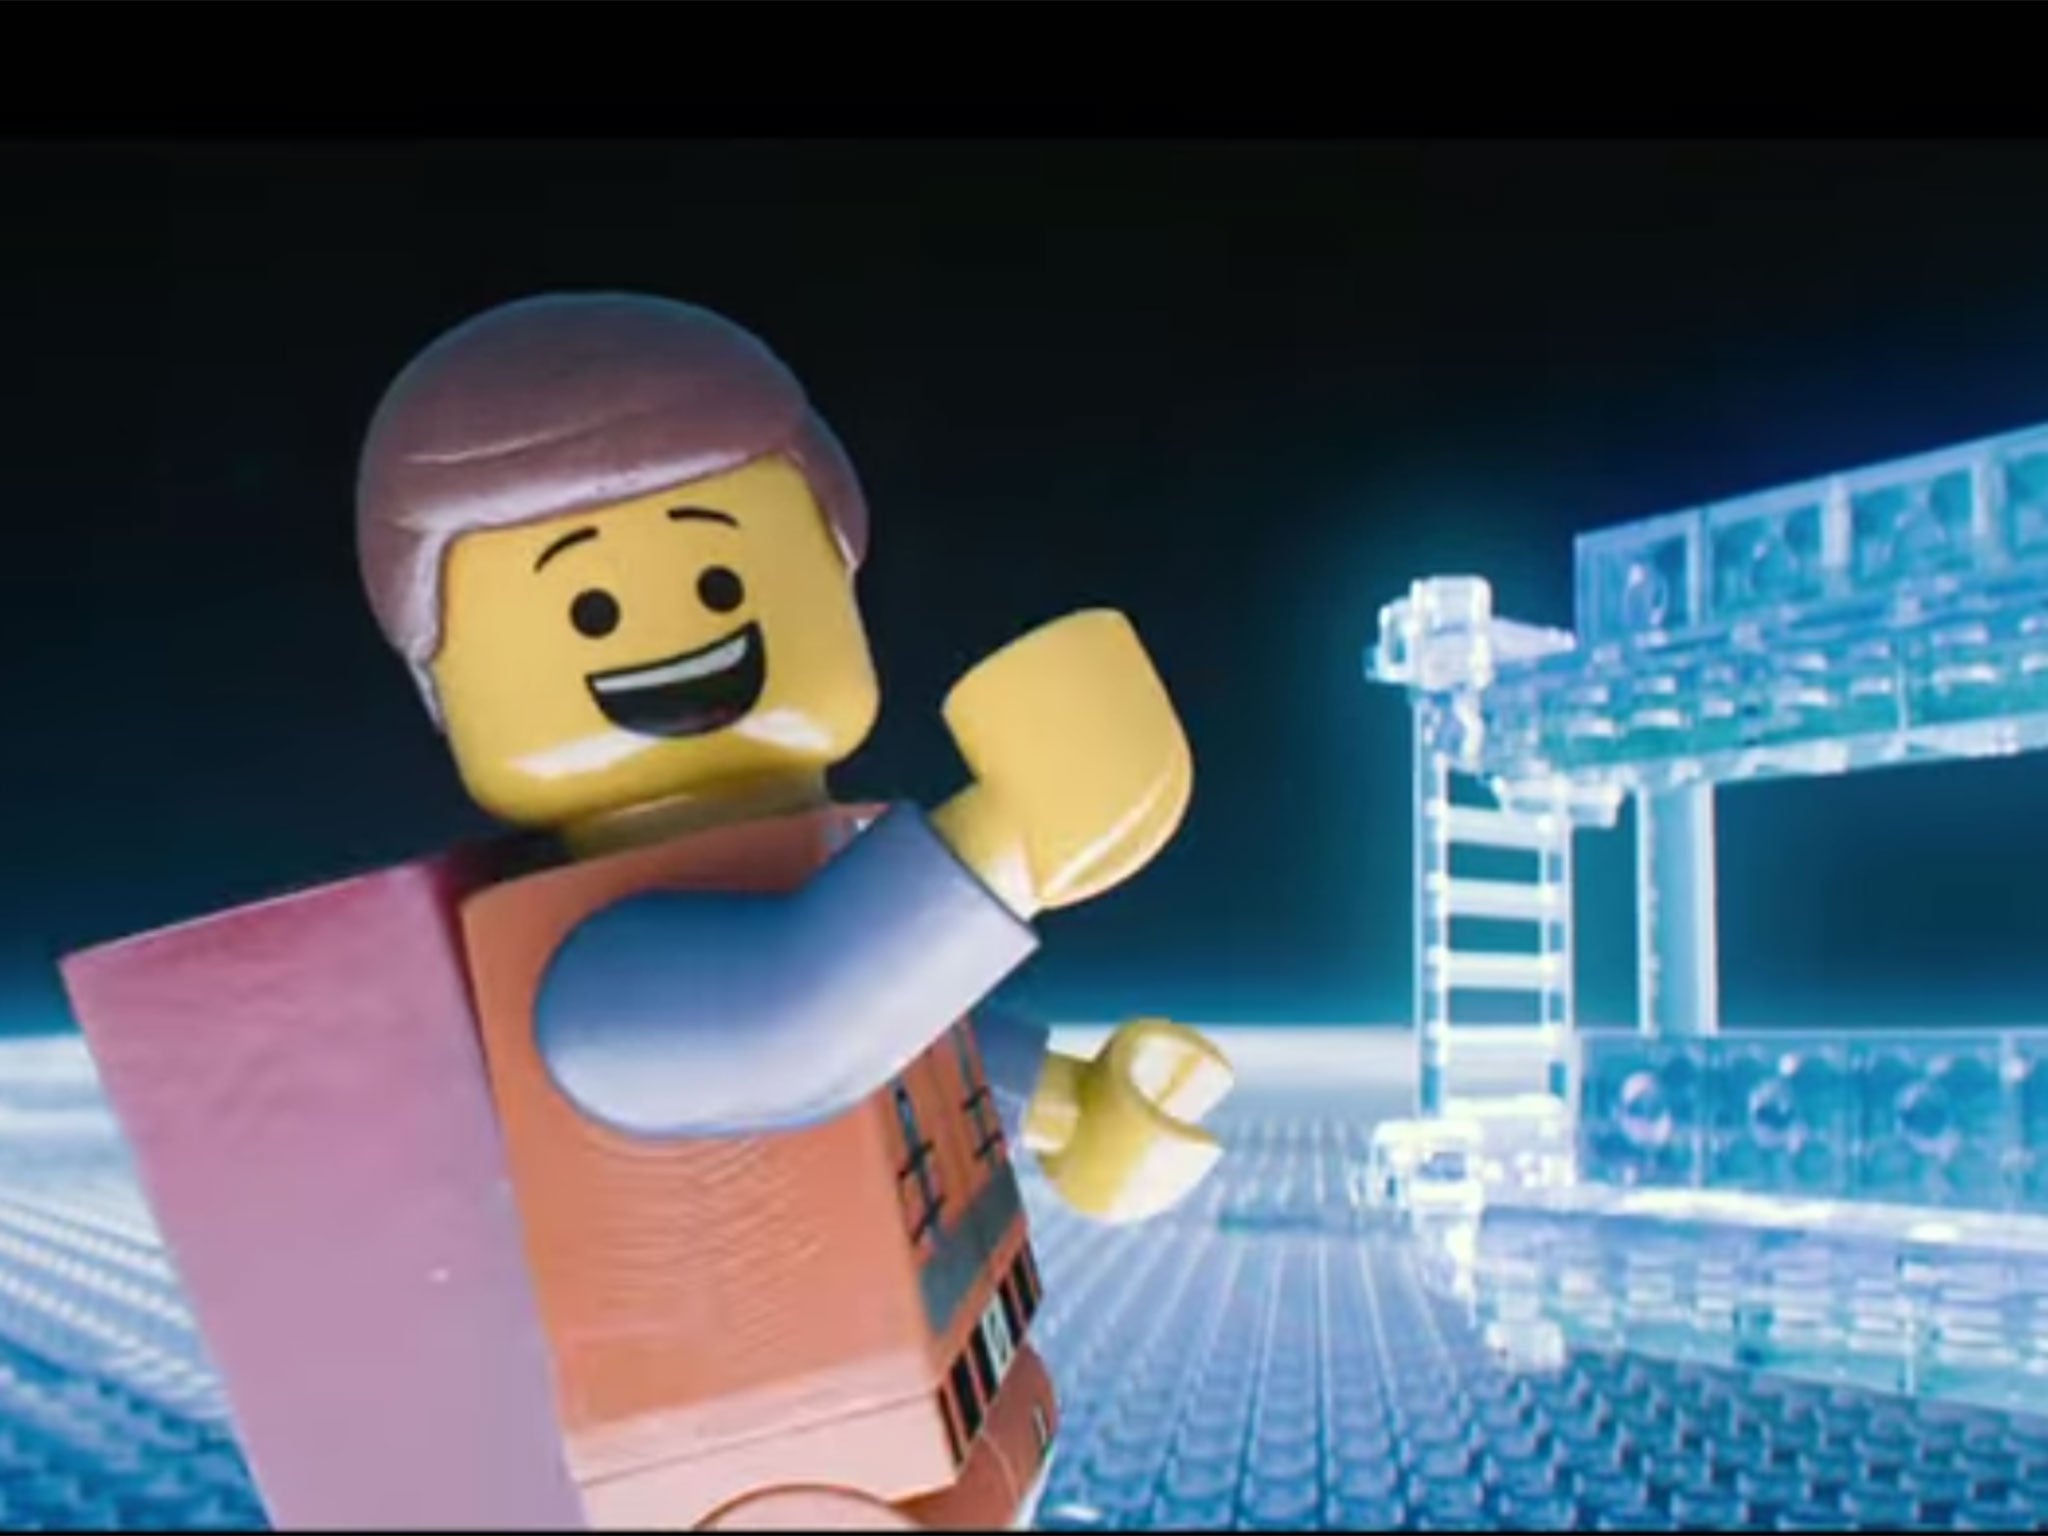 'Everything is Awesome' from The Lego Movie is nominated for Best Original Song at the Oscars 2015